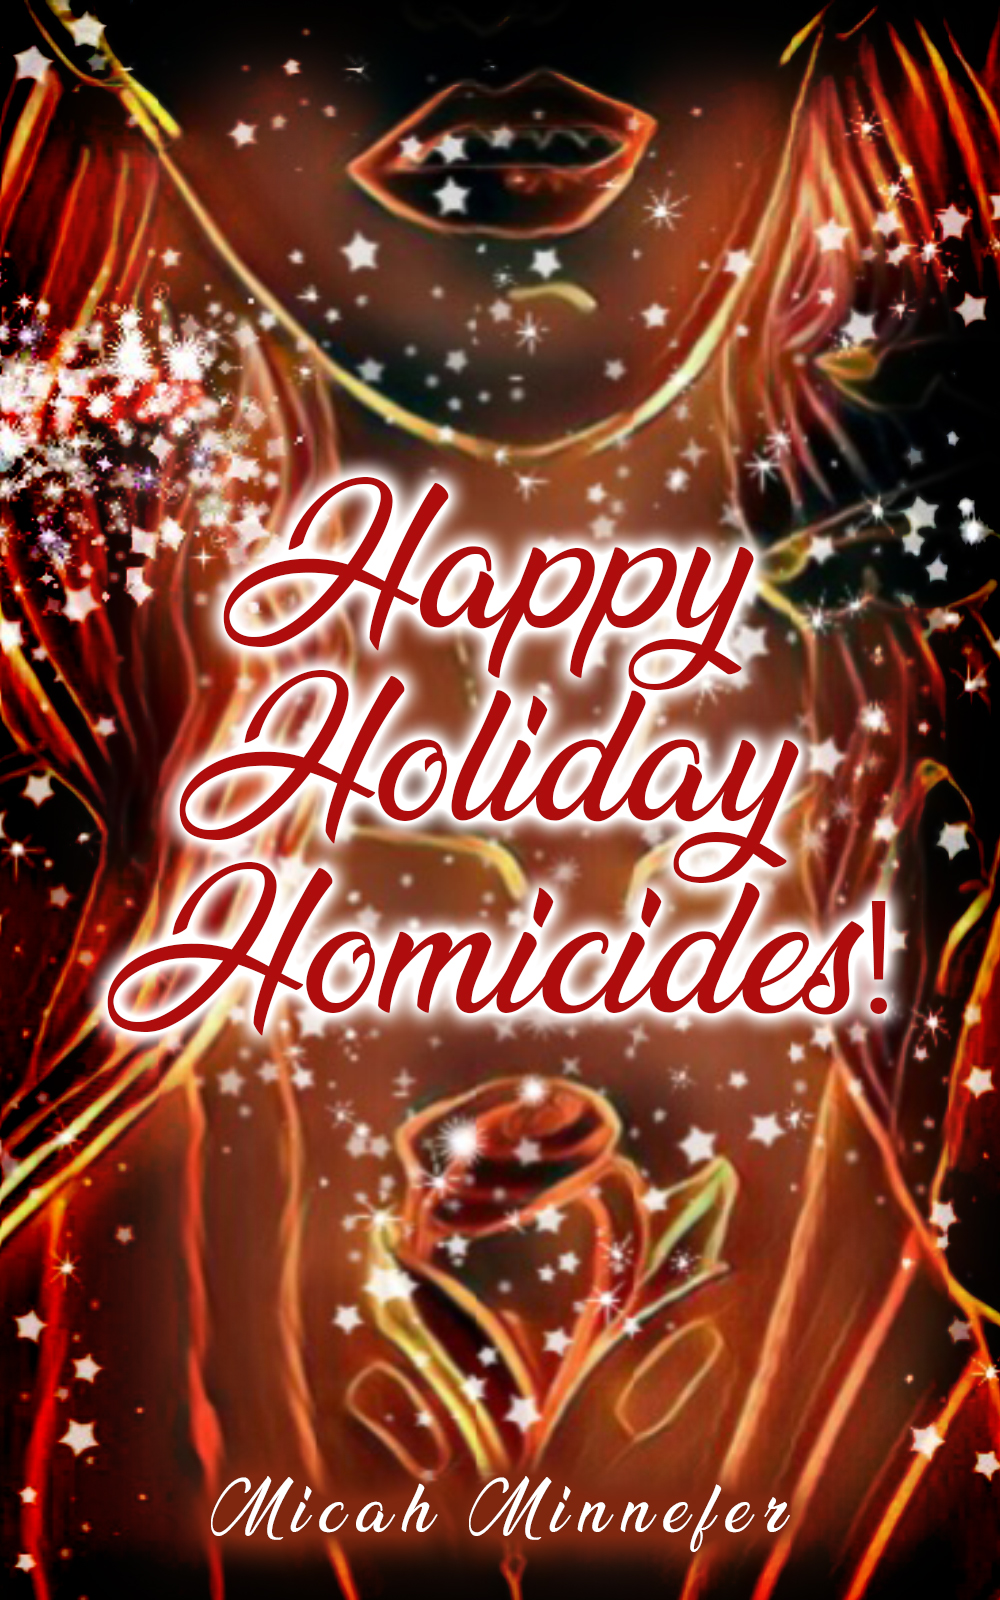 FREE: Happy Holiday Homicides by Micah Minnefer